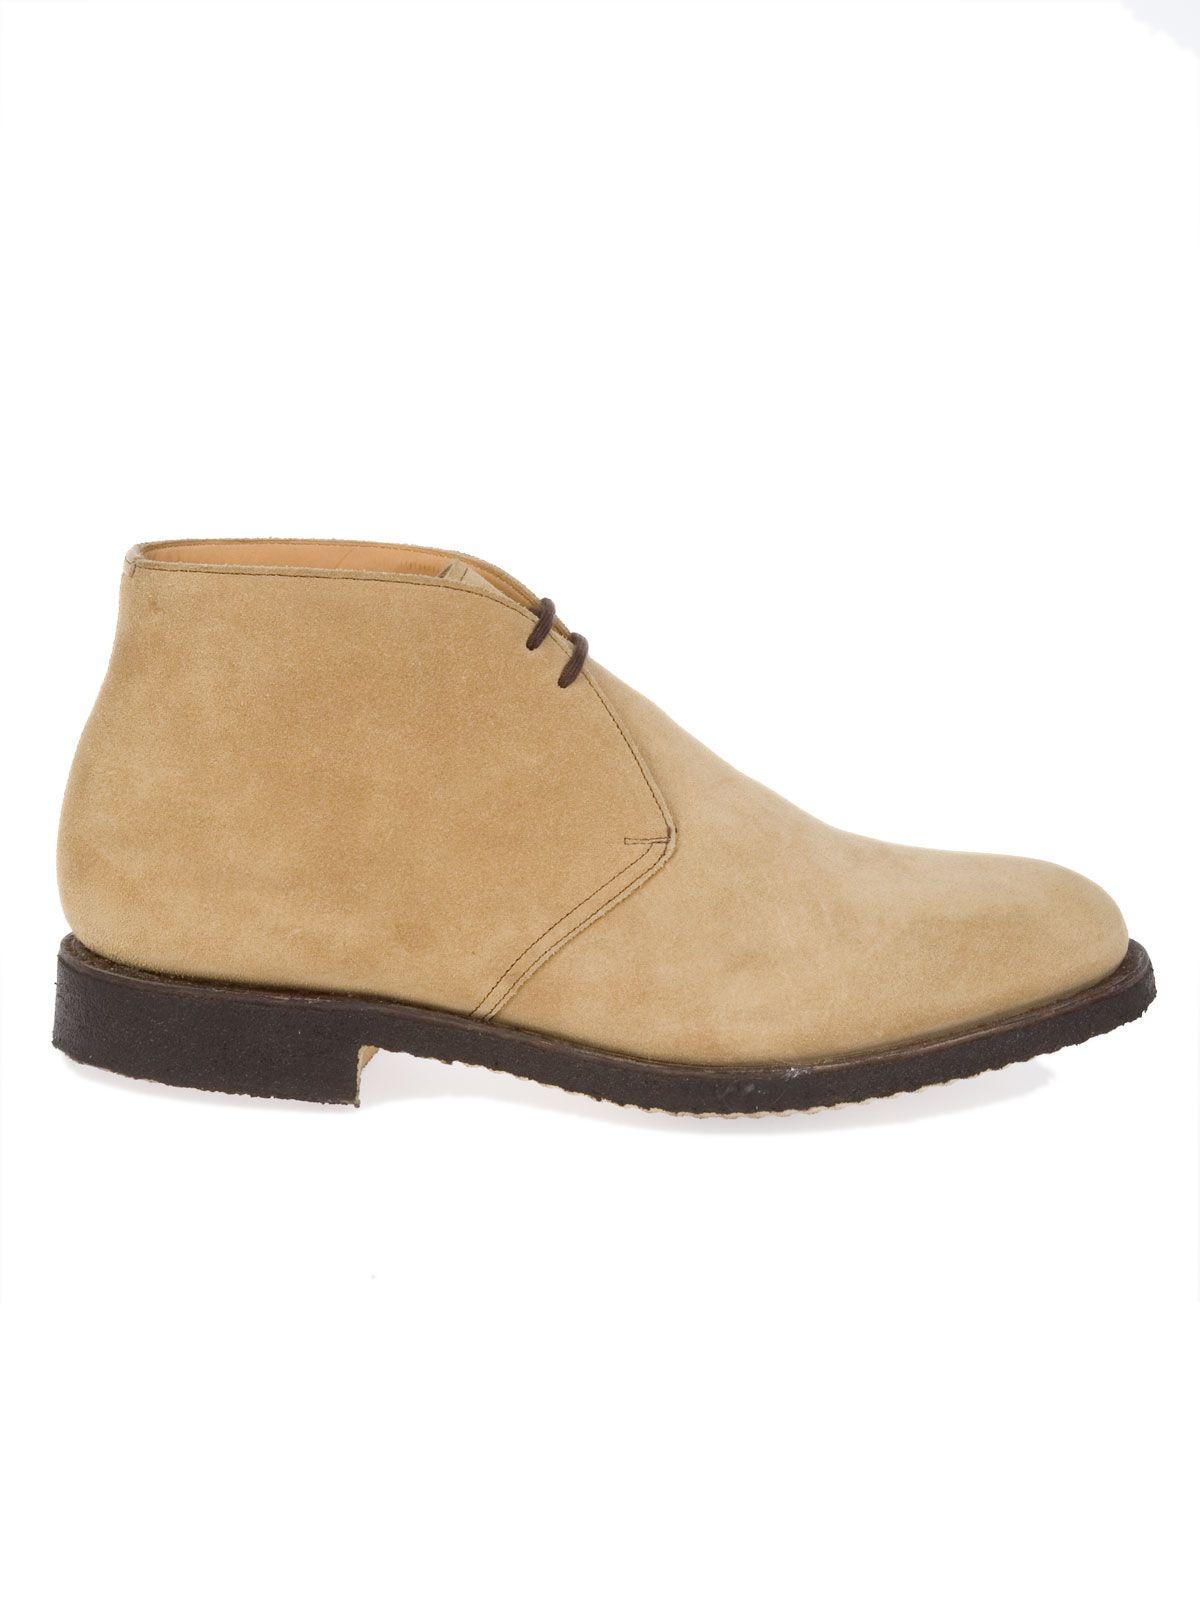 Church's Suede Ankle Boots in White for Men - Lyst